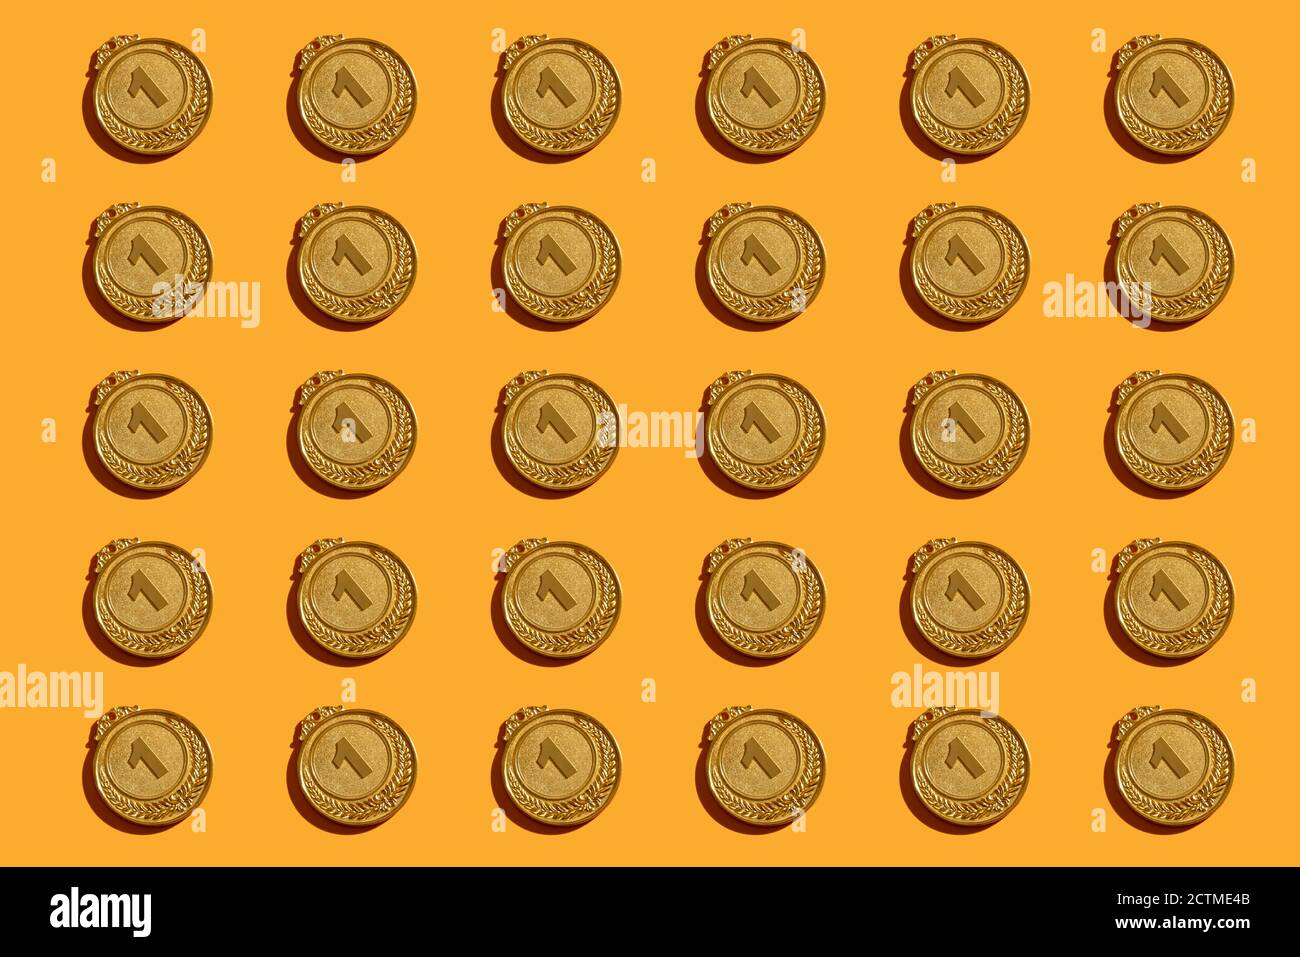 Pattern of gold medals with a hard shadow on a yellow background. Stock Photo